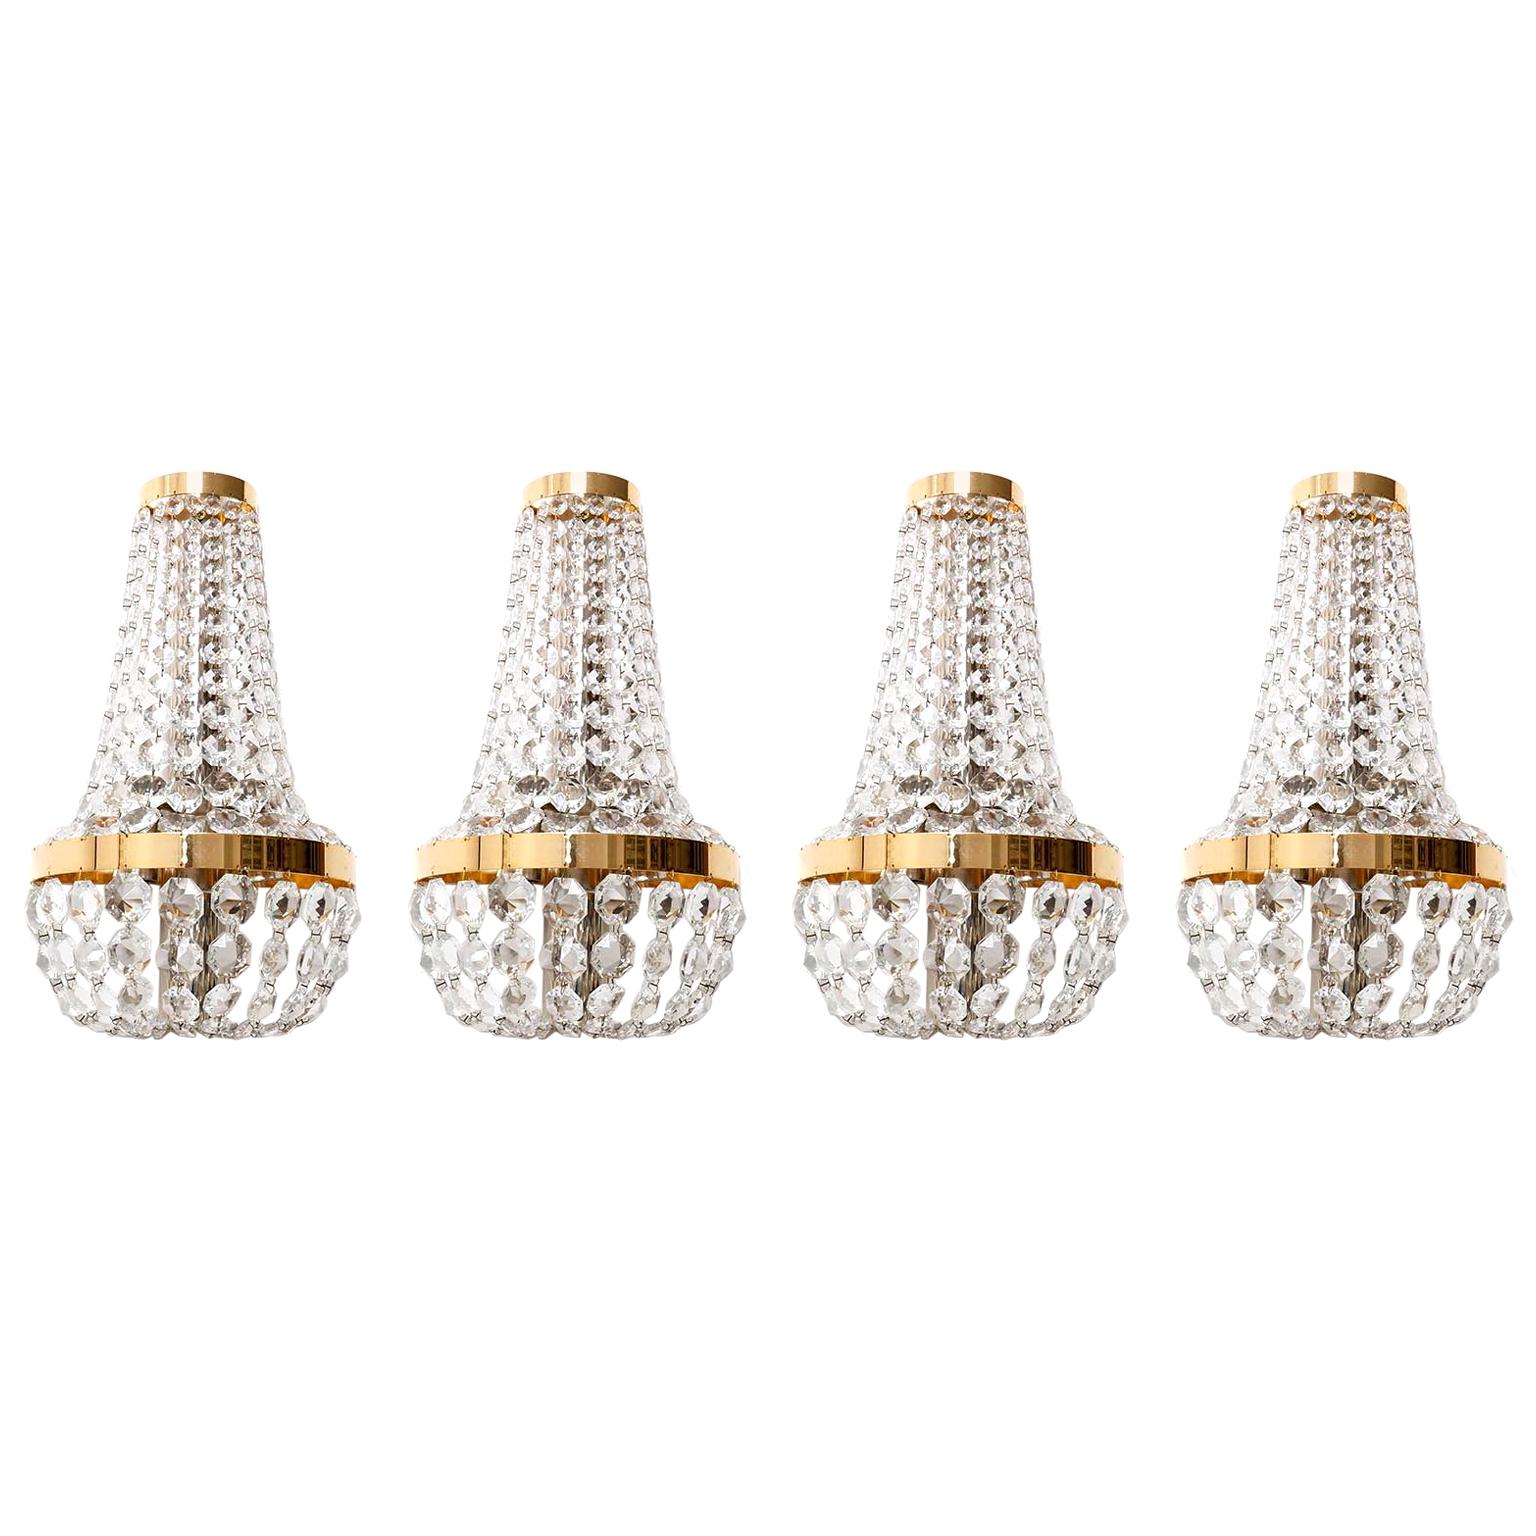 Four Large Bakalowits Wall Lights Sconces, Brass Nickel Crystal, Austria, 1950s For Sale